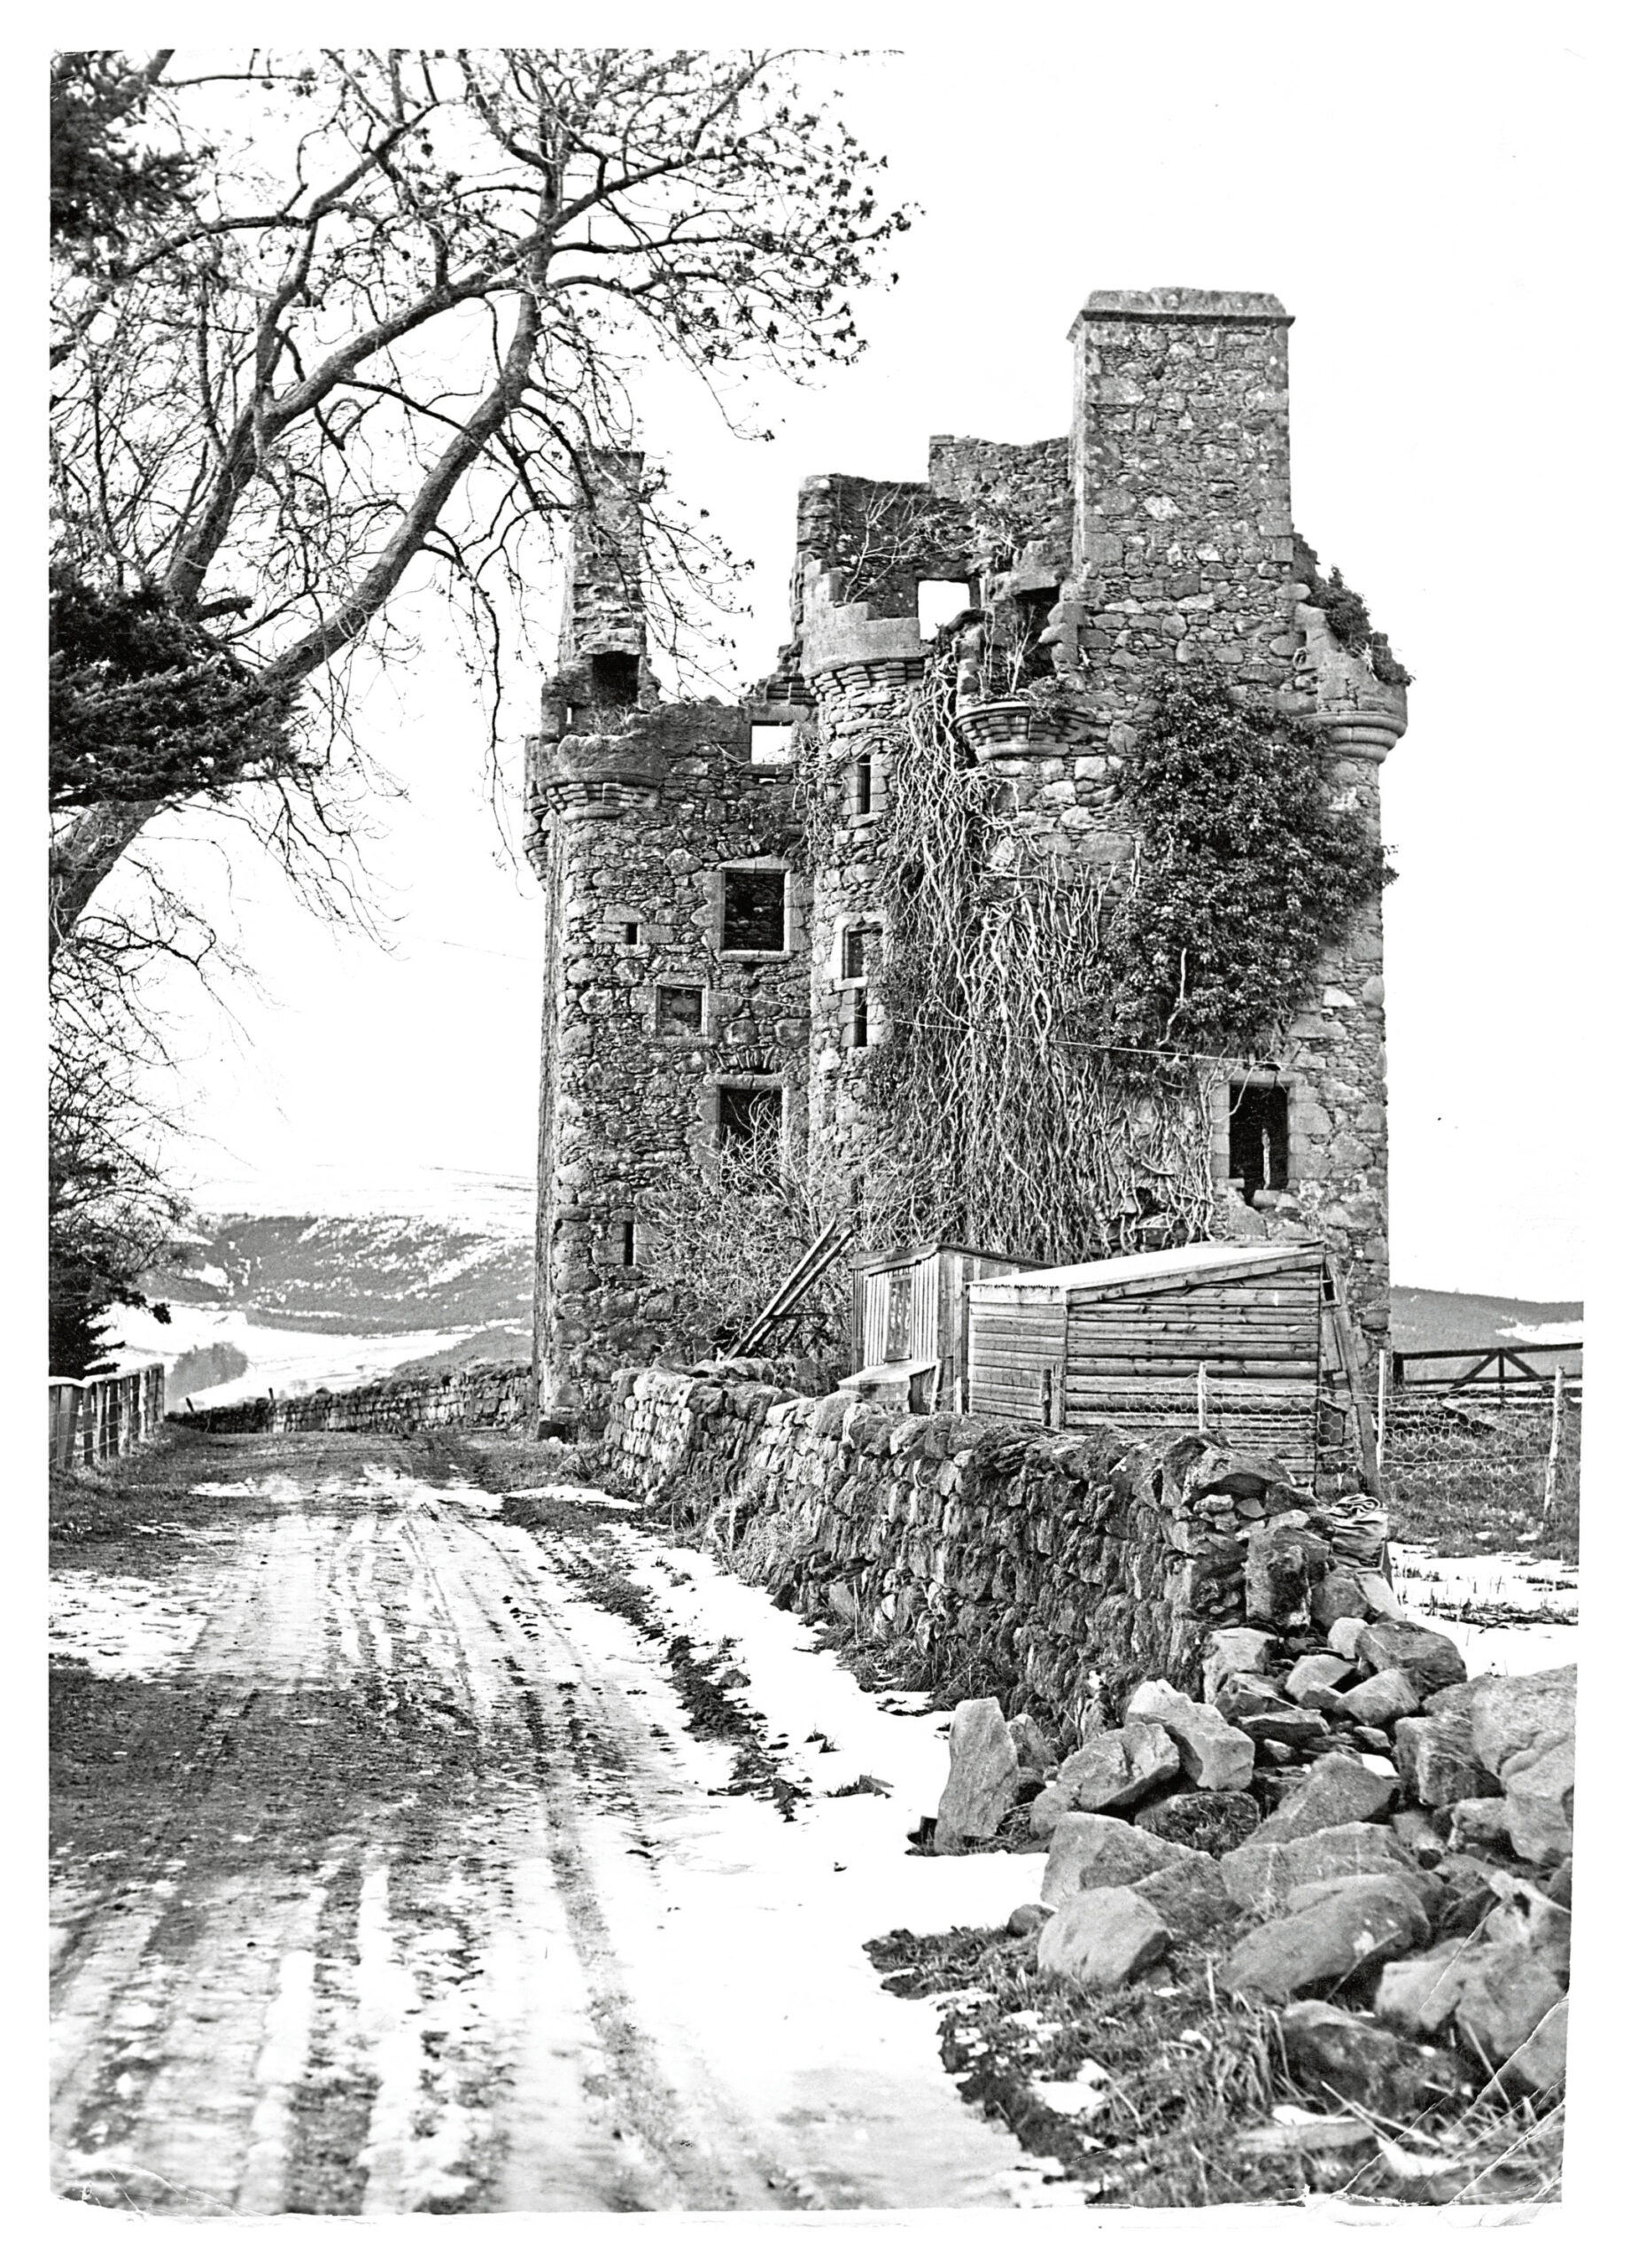 Tillycairn Castle as a ruin in the 60s